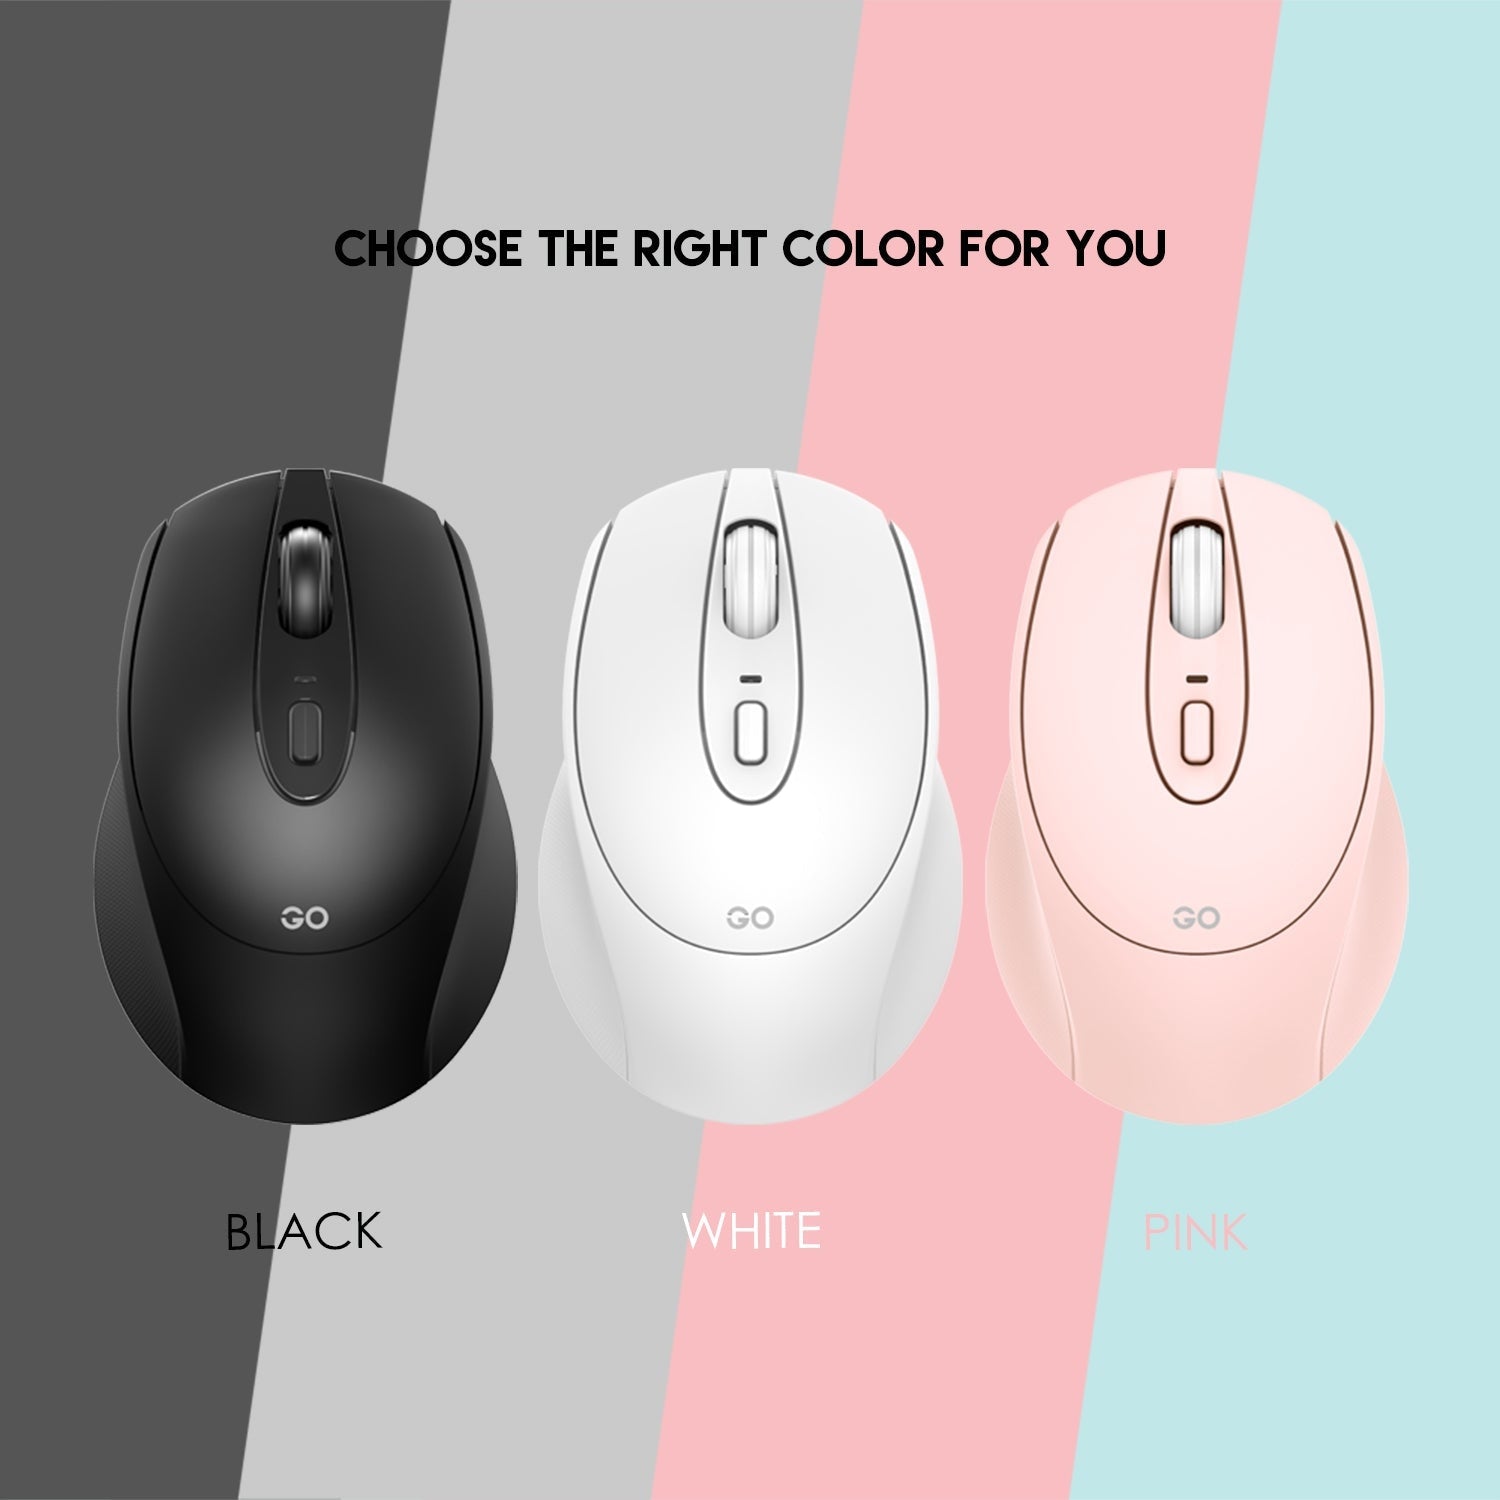 Fantech W191 Wireless Mouse with Silent Click JOD 8